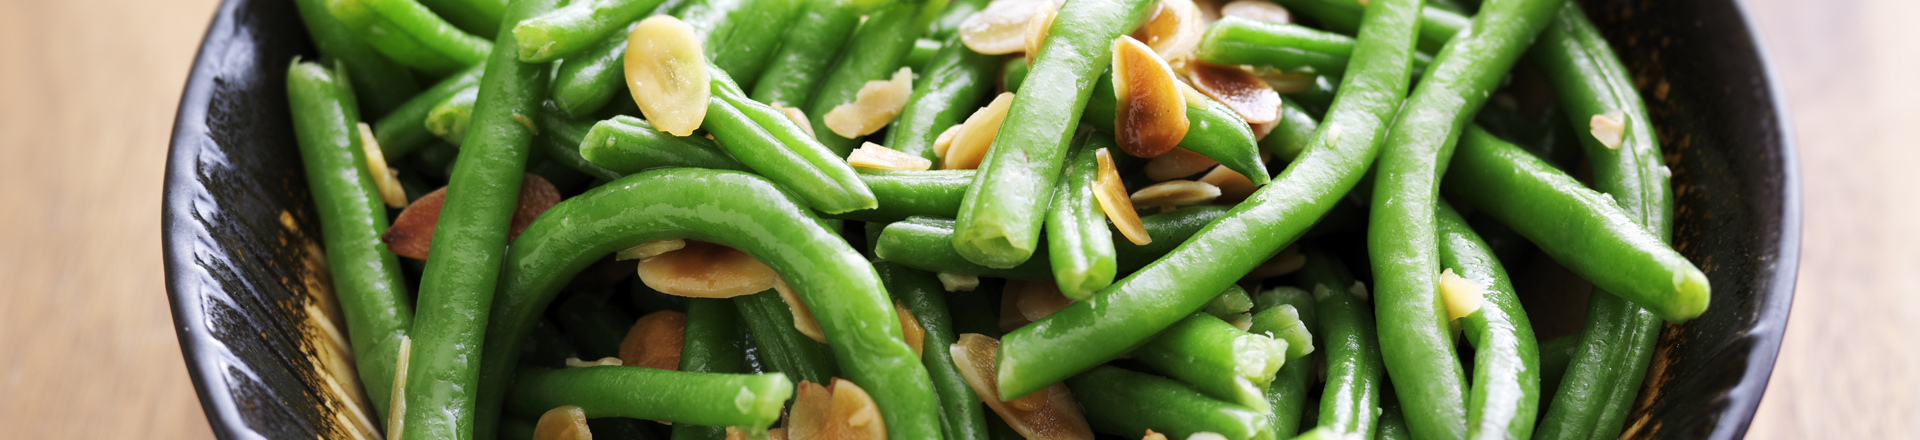 Cardio-Protect Green Beans